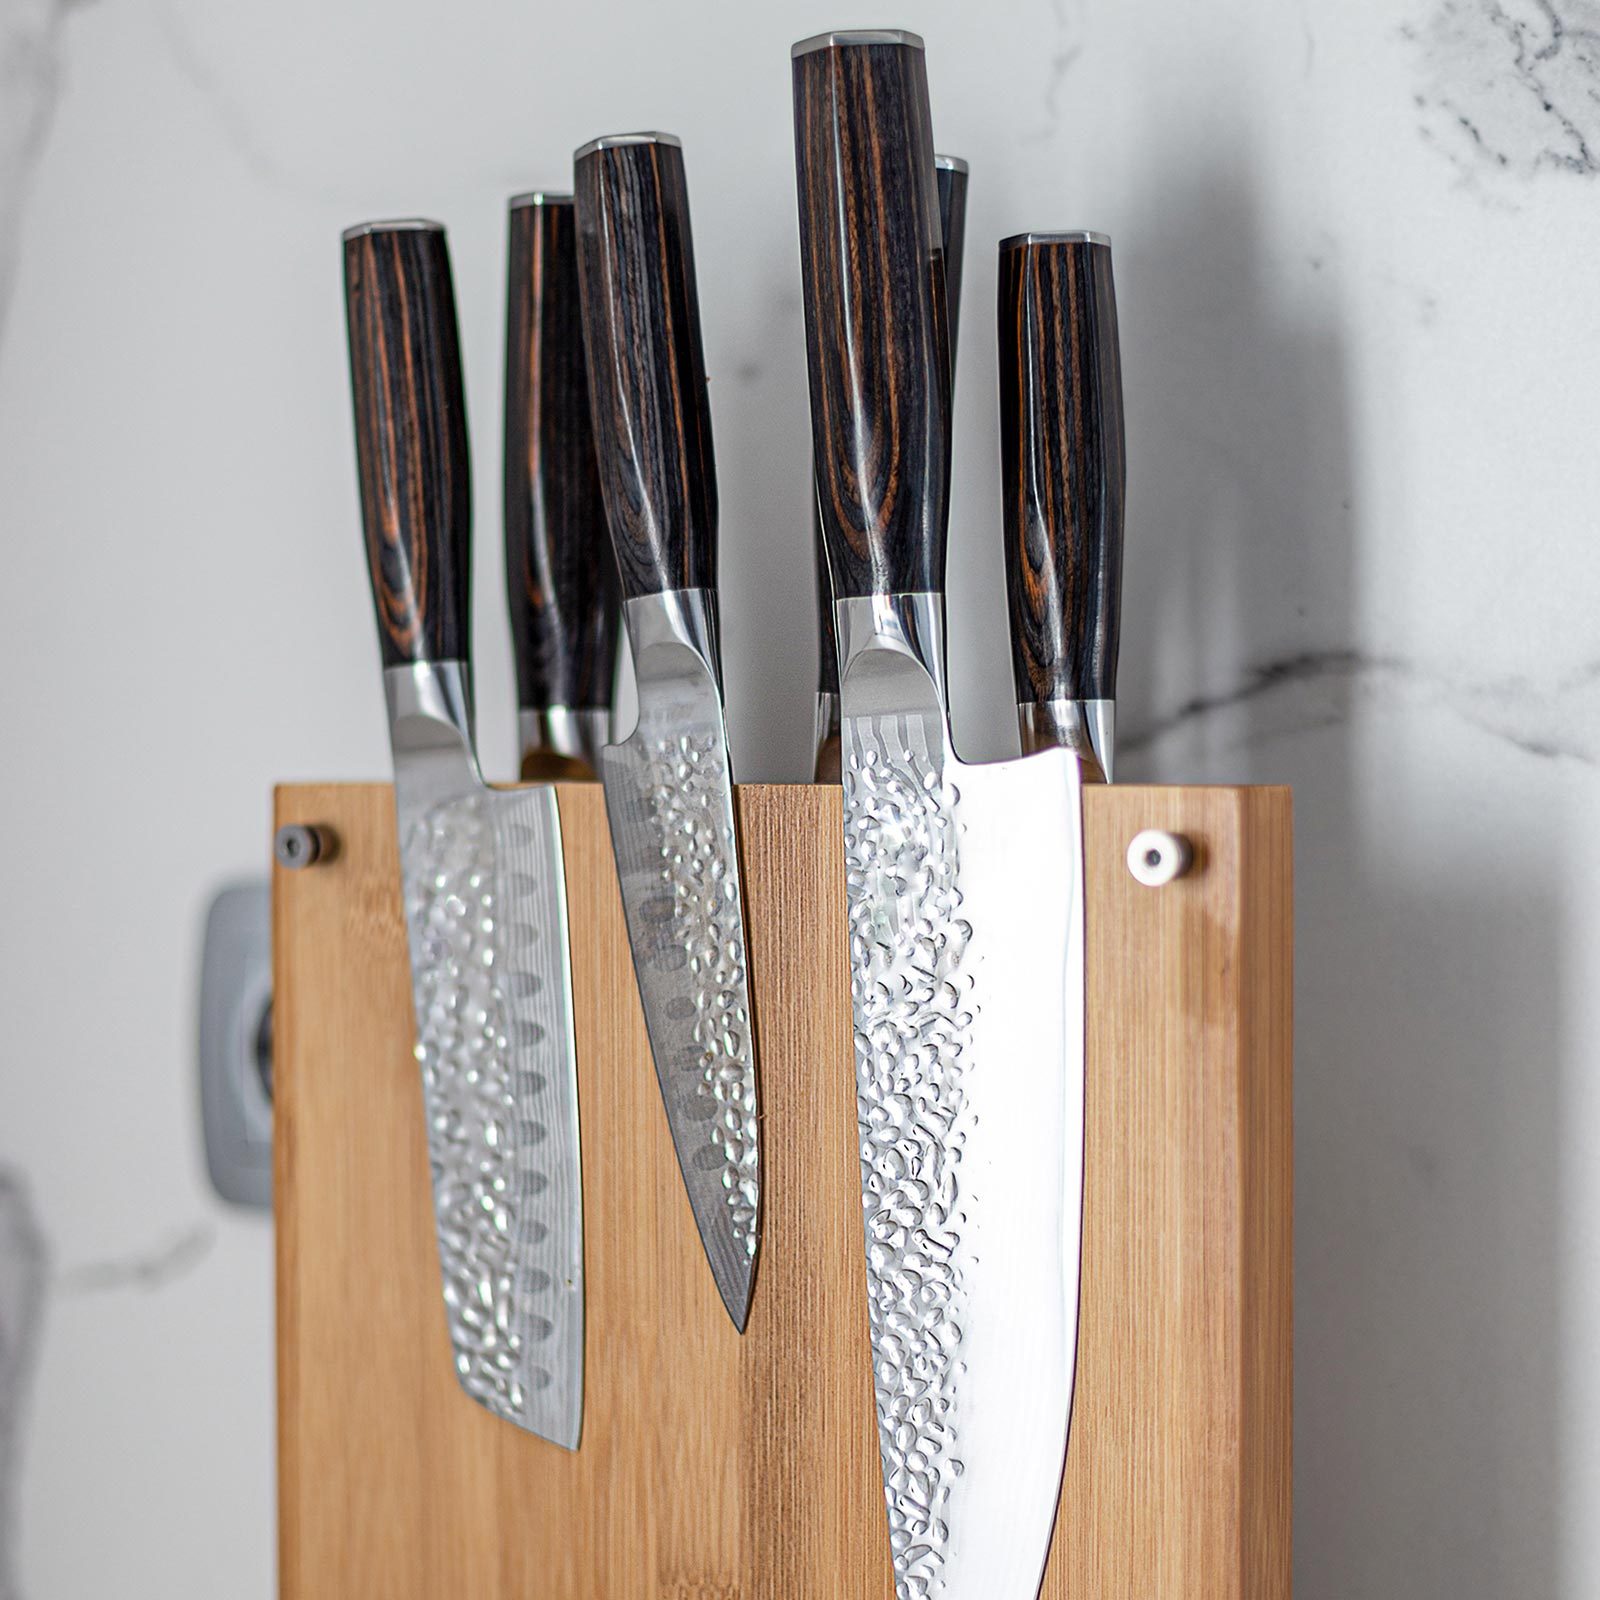 https://www.tasteofhome.com/wp-content/uploads/2022/12/GettyImages-1391432872-DH-TOH-Resize-Damascus-Knives-Best-For-Your-Kitchen-SOCIAL.jpg